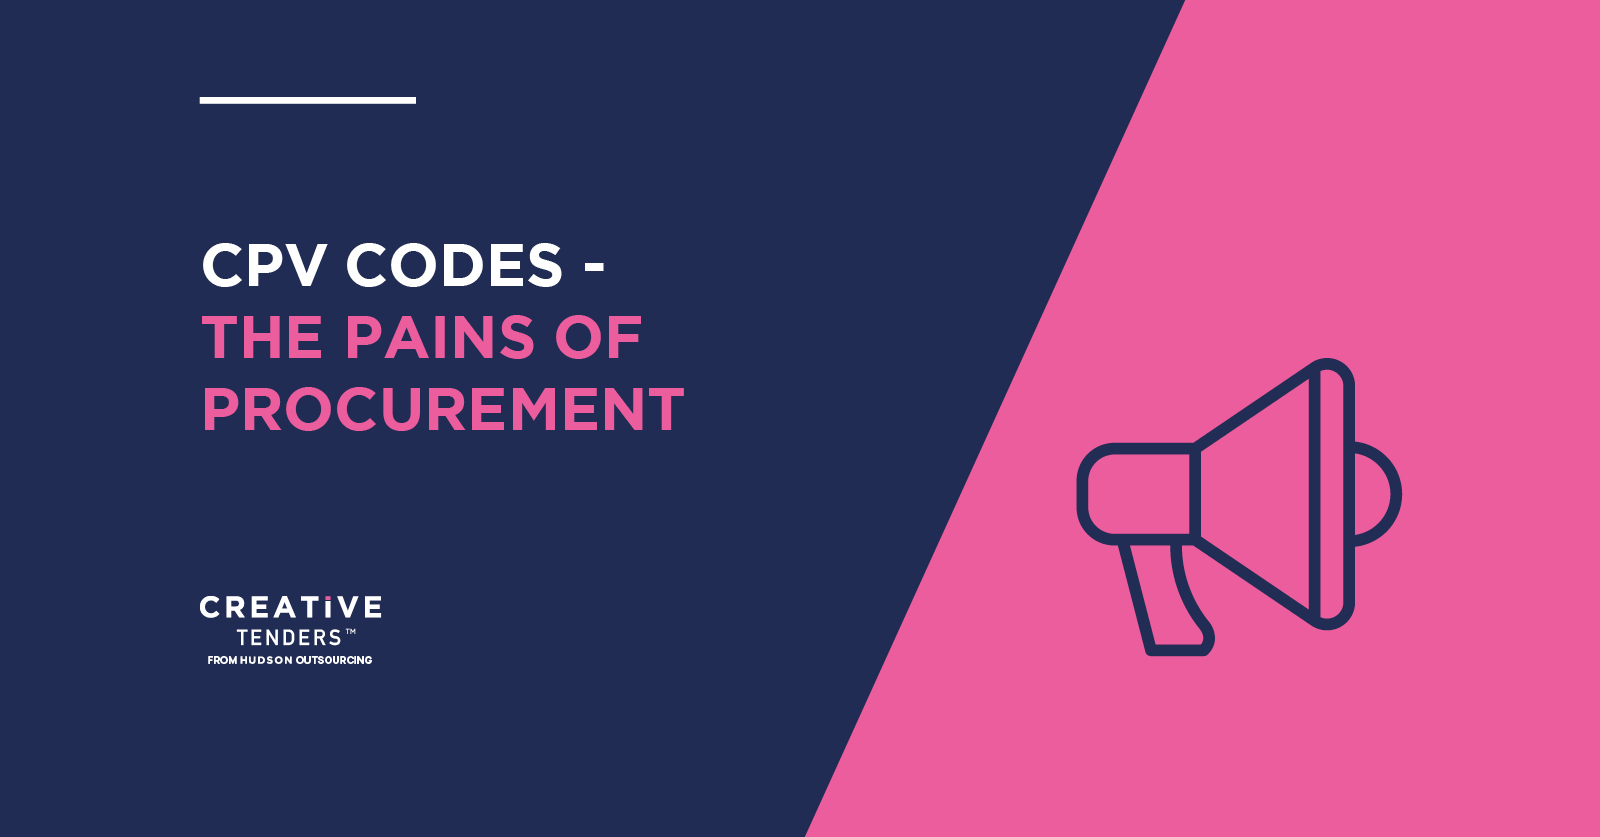 WHAT ARE CPV CODES? THE PAINS AND PITFALLS OF PROCUREMENT